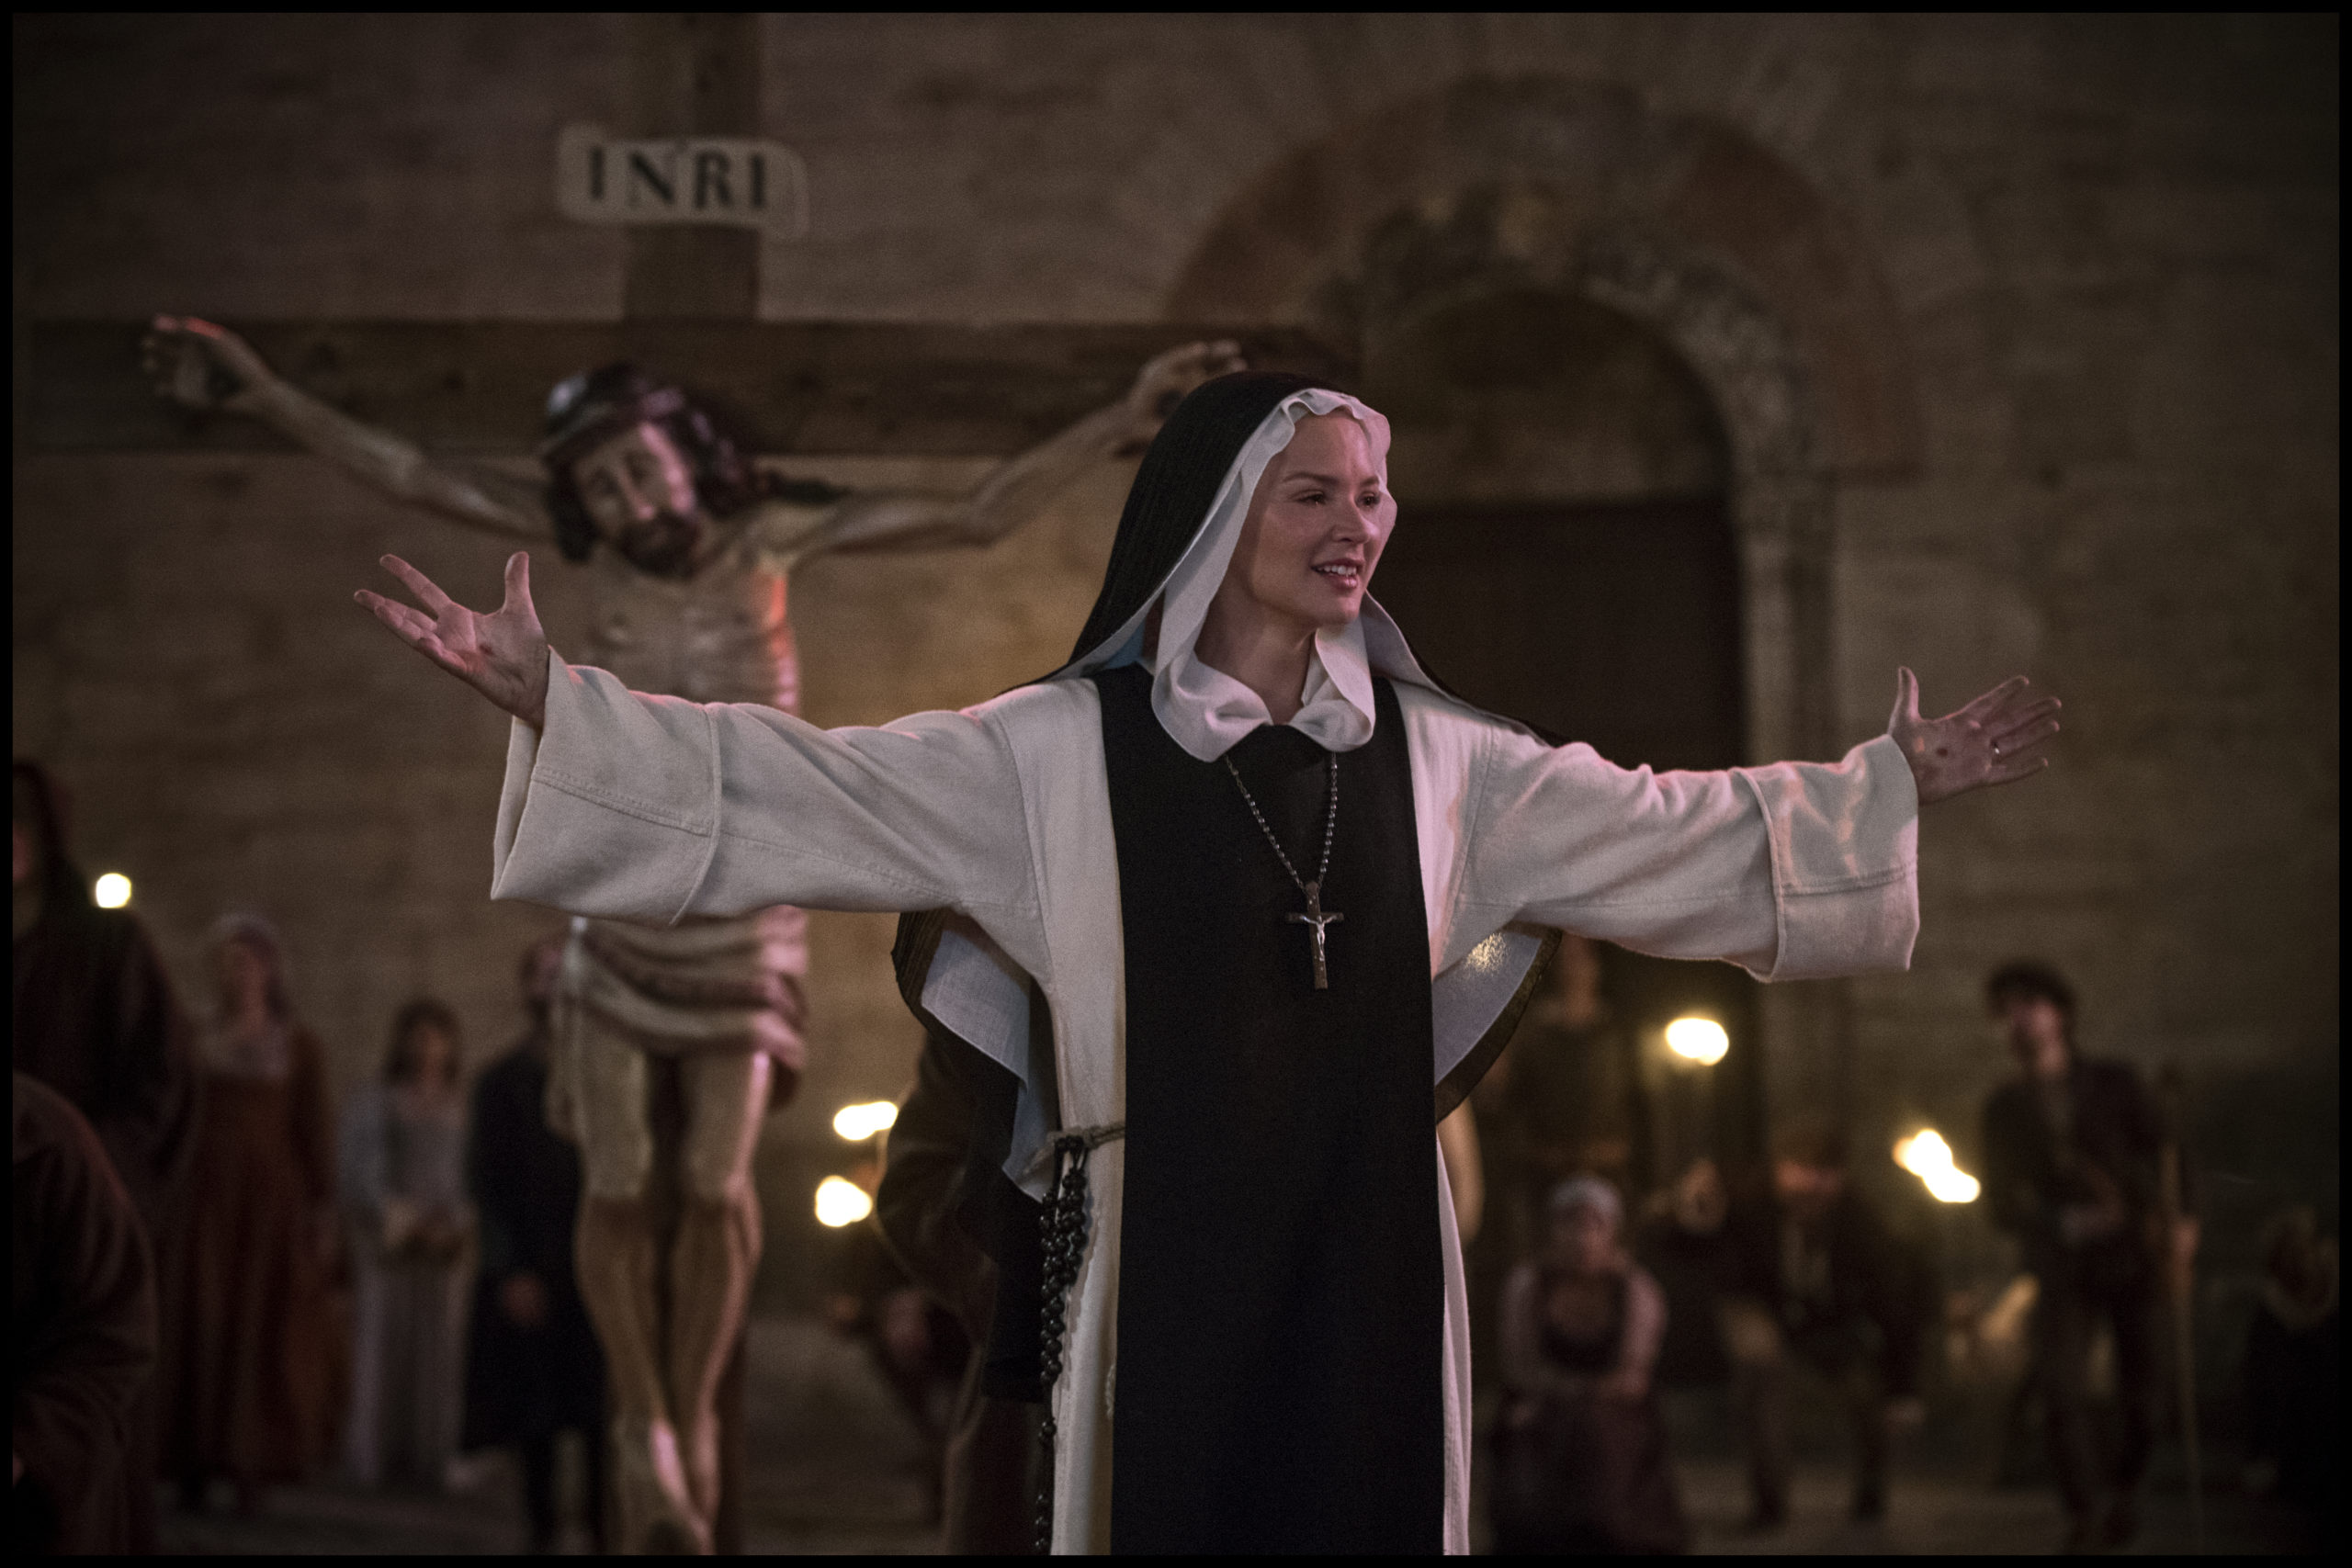 Benedetta Poster Debut about Controversial Historical Lesbian Nun